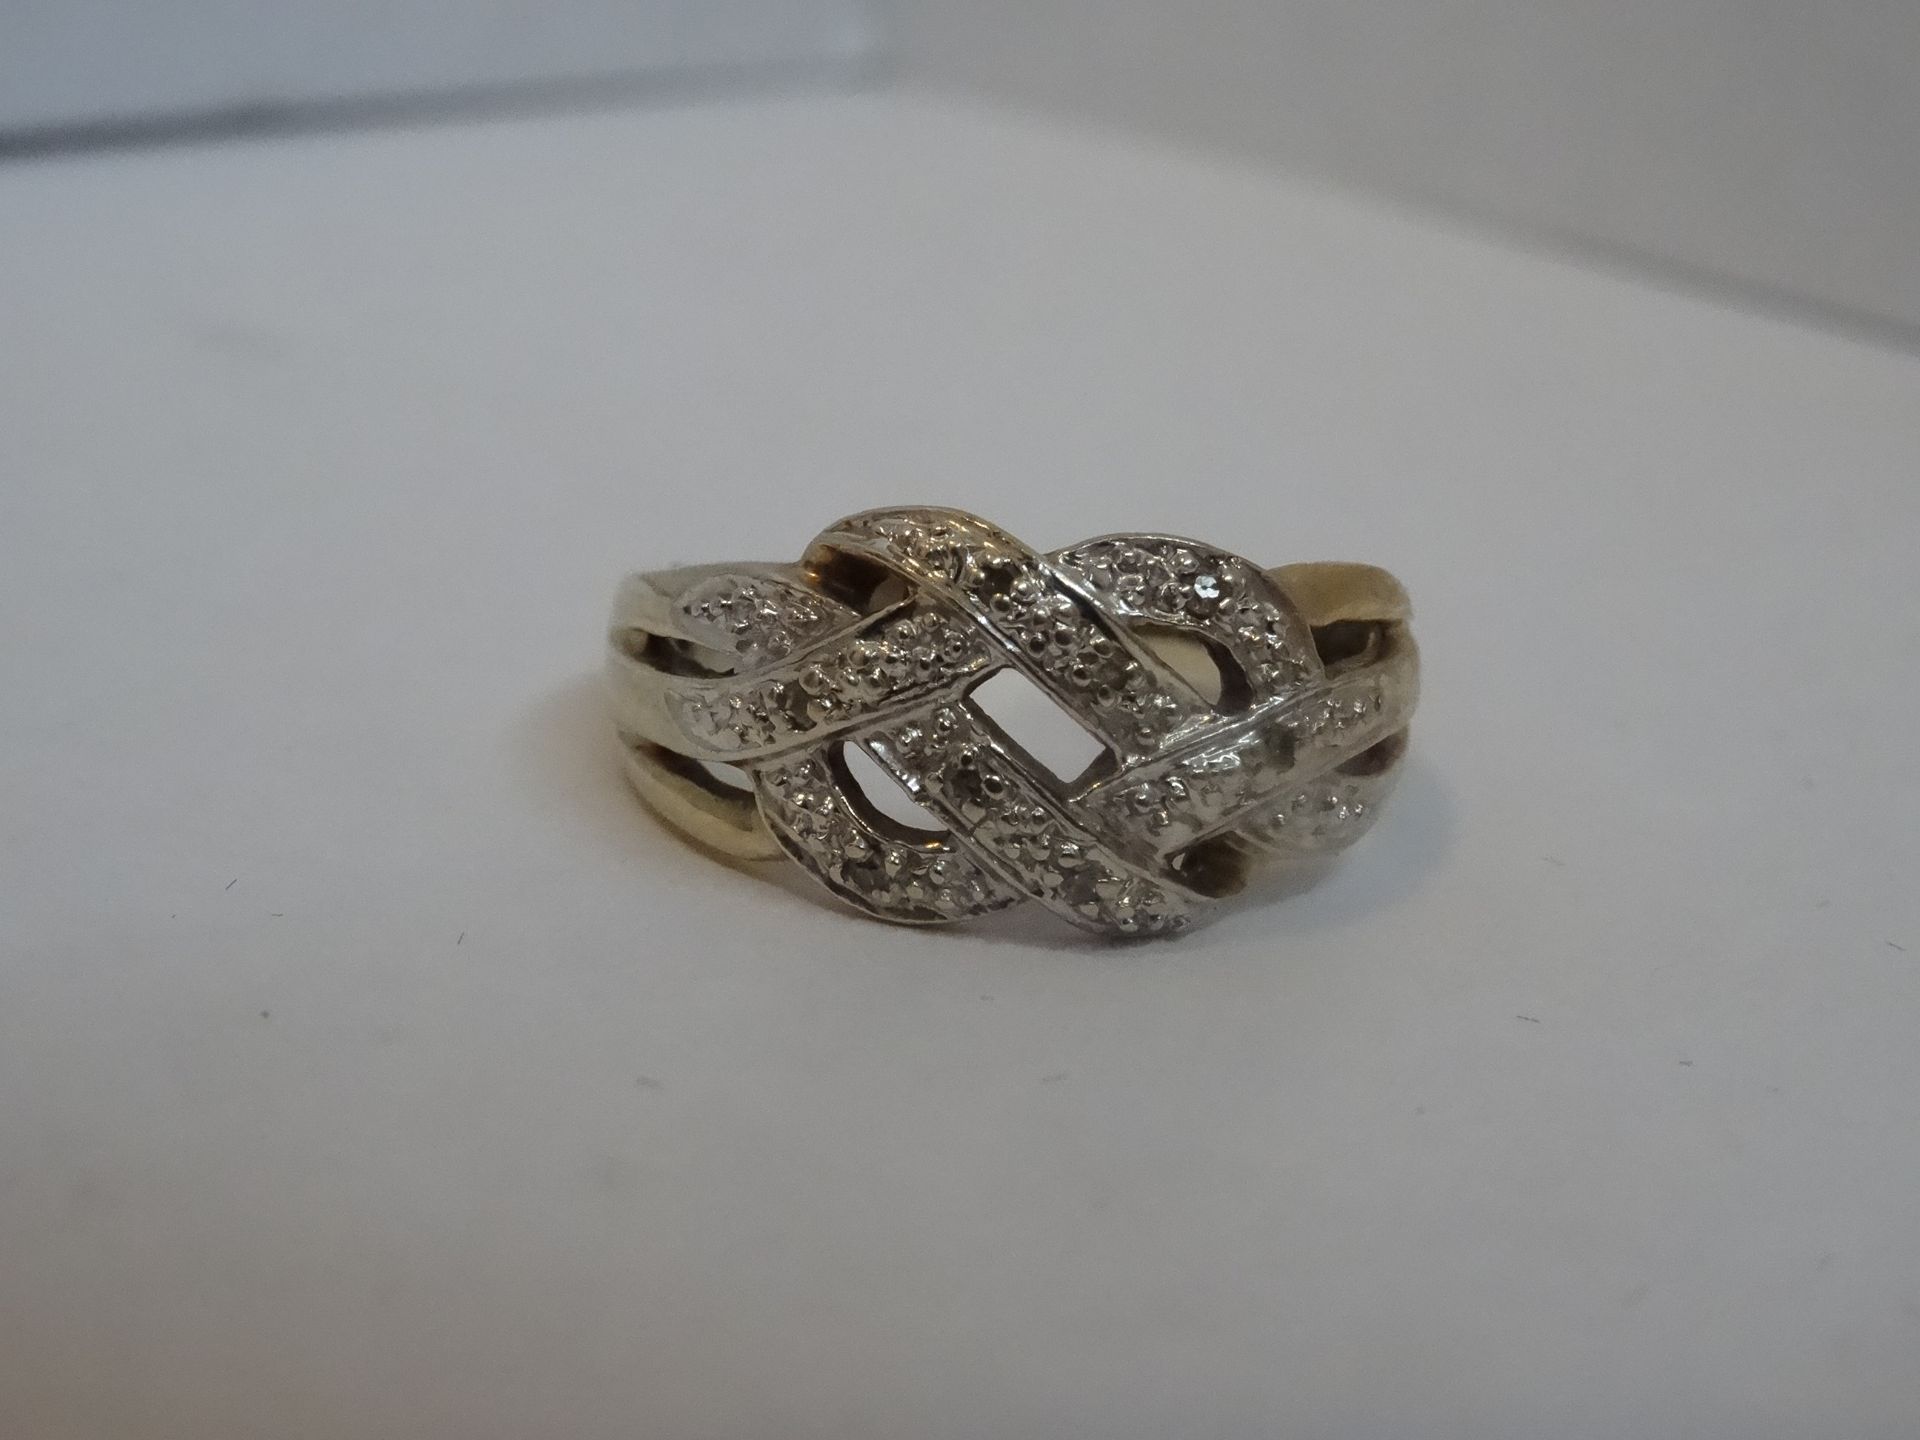 9 Carat Yellow Gold Diamond Pave Ring. Total Piece Weight 3.01 Grams - Image 2 of 3